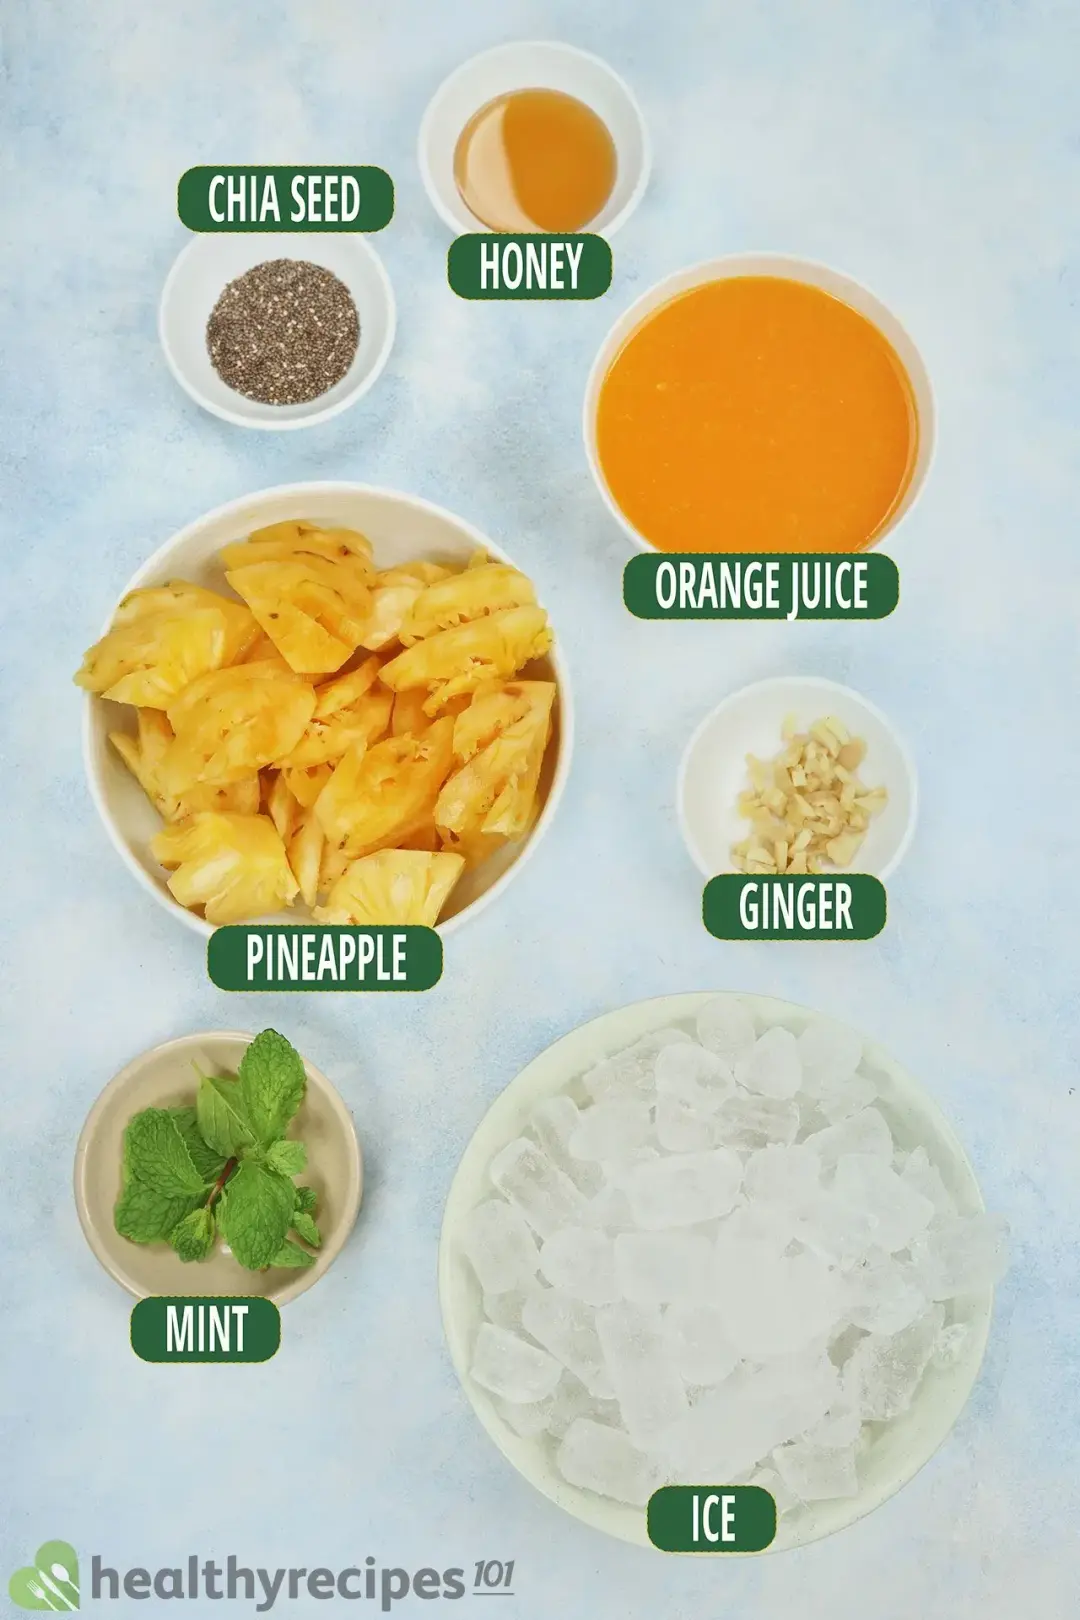 Ingredients for This Pineapple Ginger Smoothie